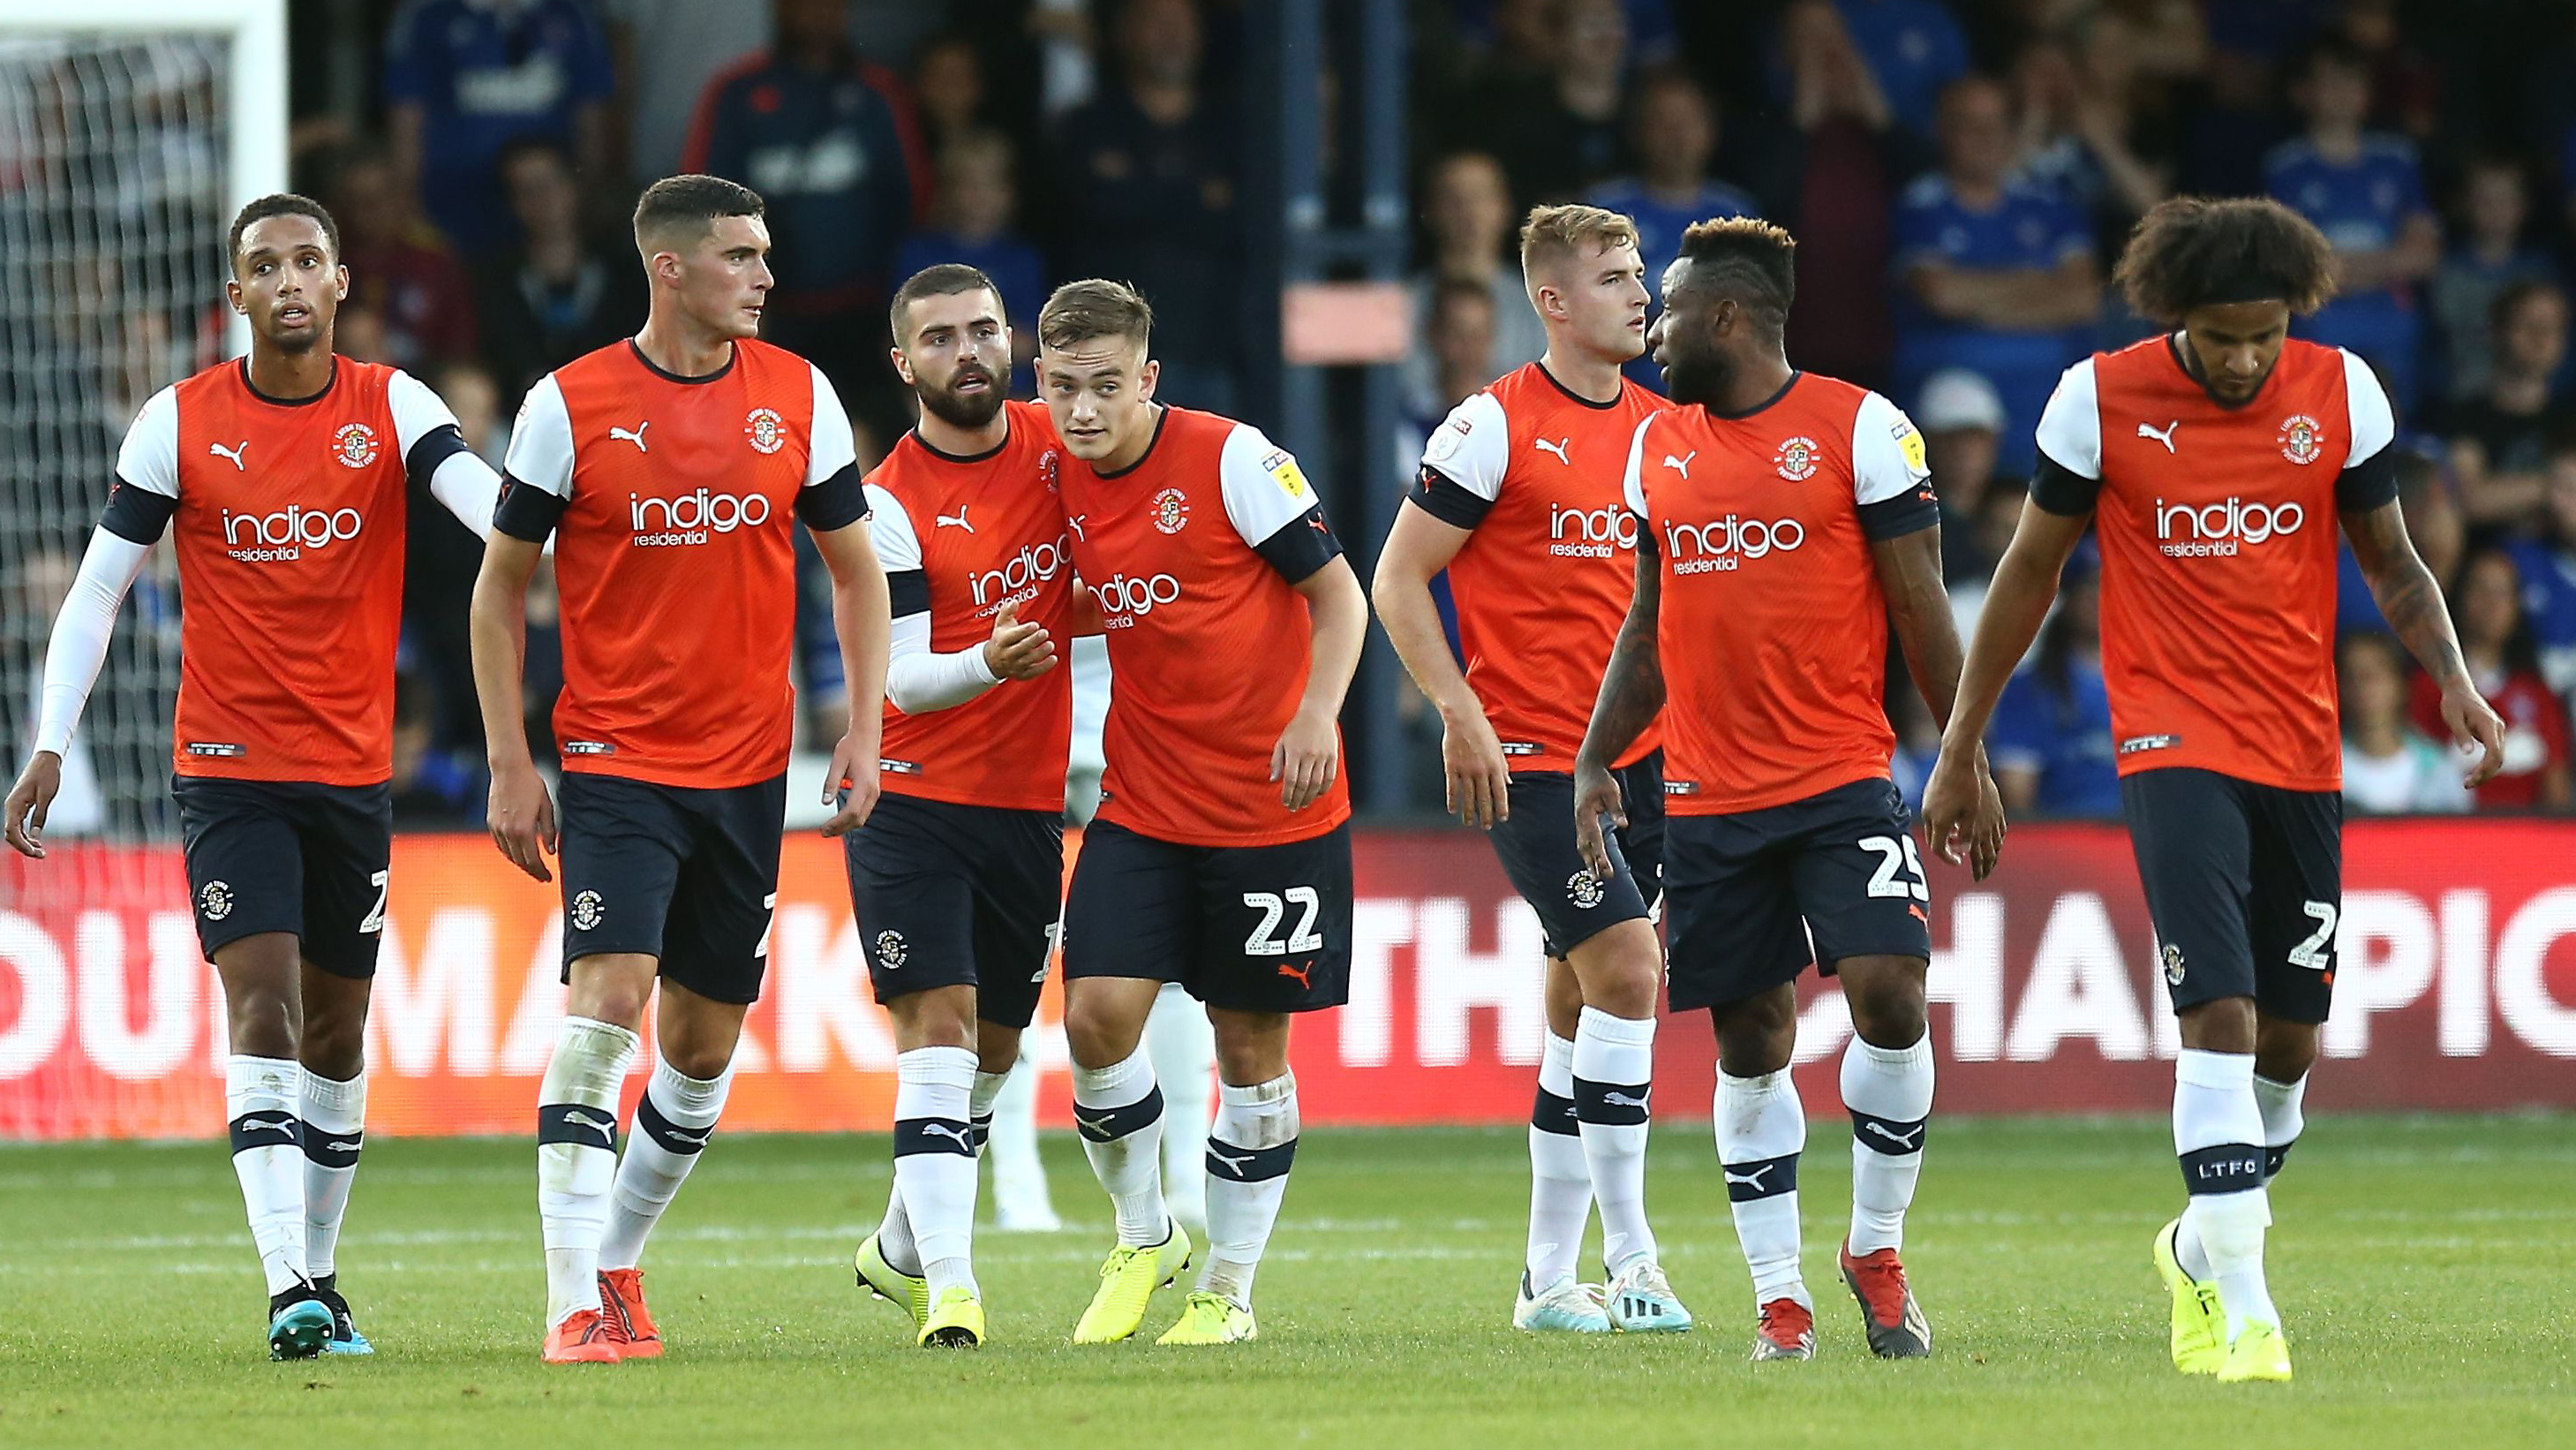 13-facts-about-luton-town